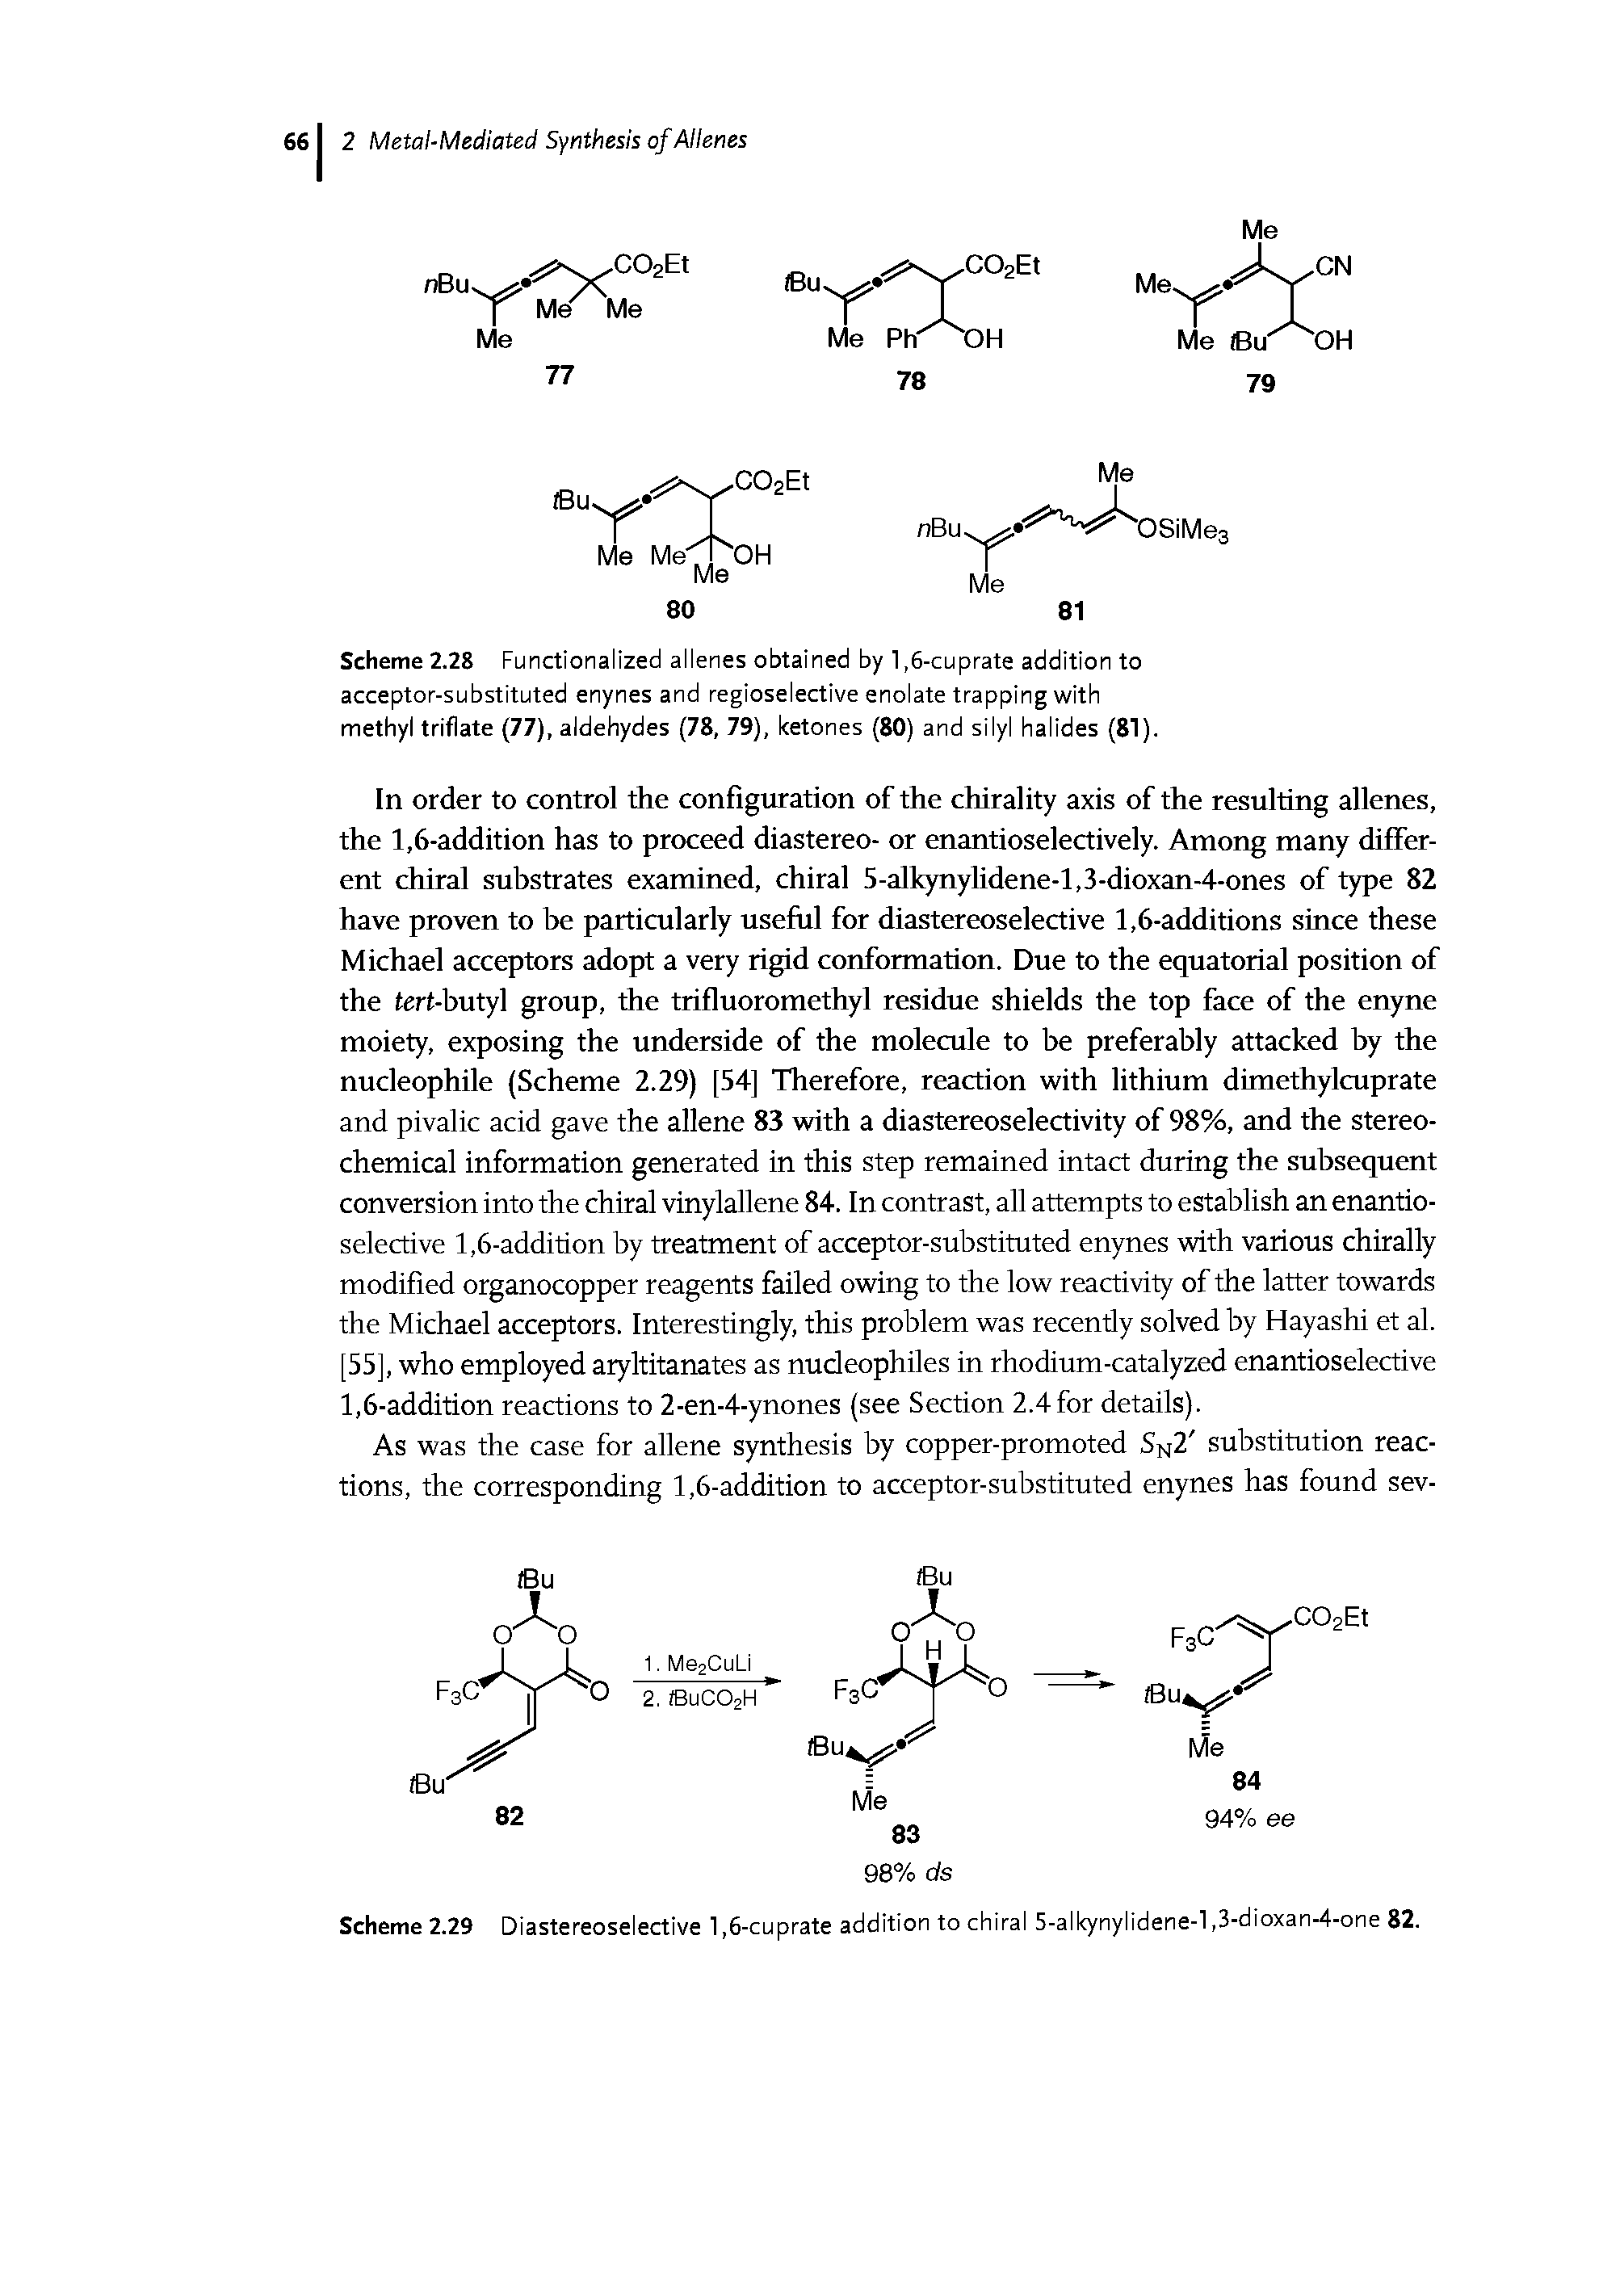 Scheme 2.28 Functionalized allenes obtained by 1,6-cuprate addition to acceptor-substituted enynes and regioselective enolate trapping with methyl triflate (77), aldehydes (78, 79), ketones (80) and silyl halides (81).